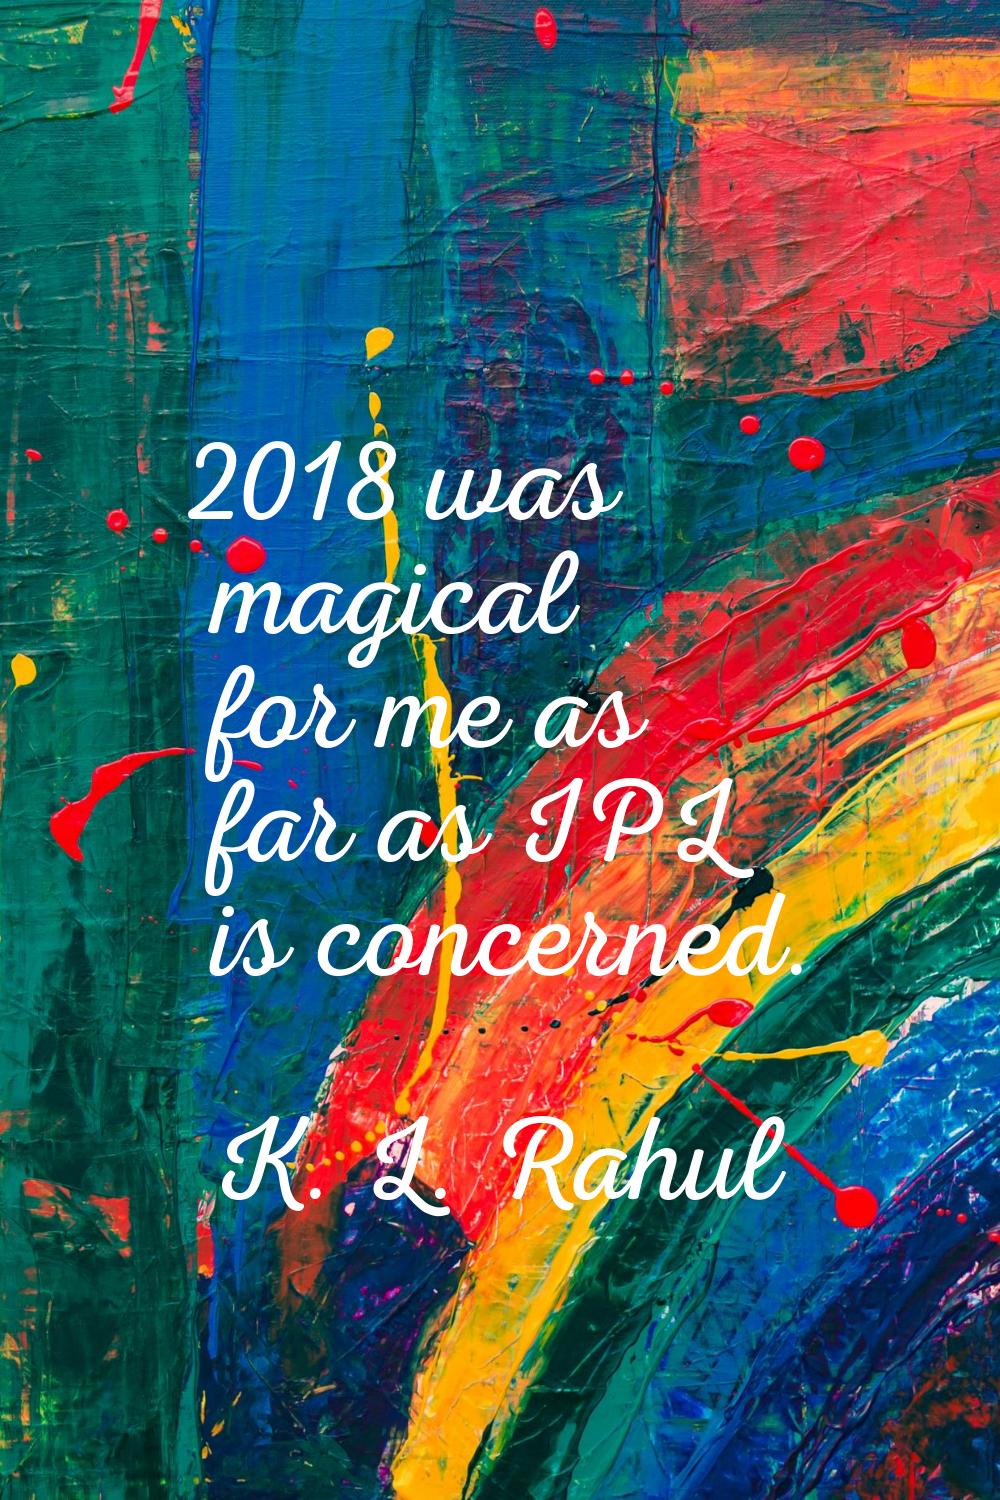 2018 was magical for me as far as IPL is concerned.